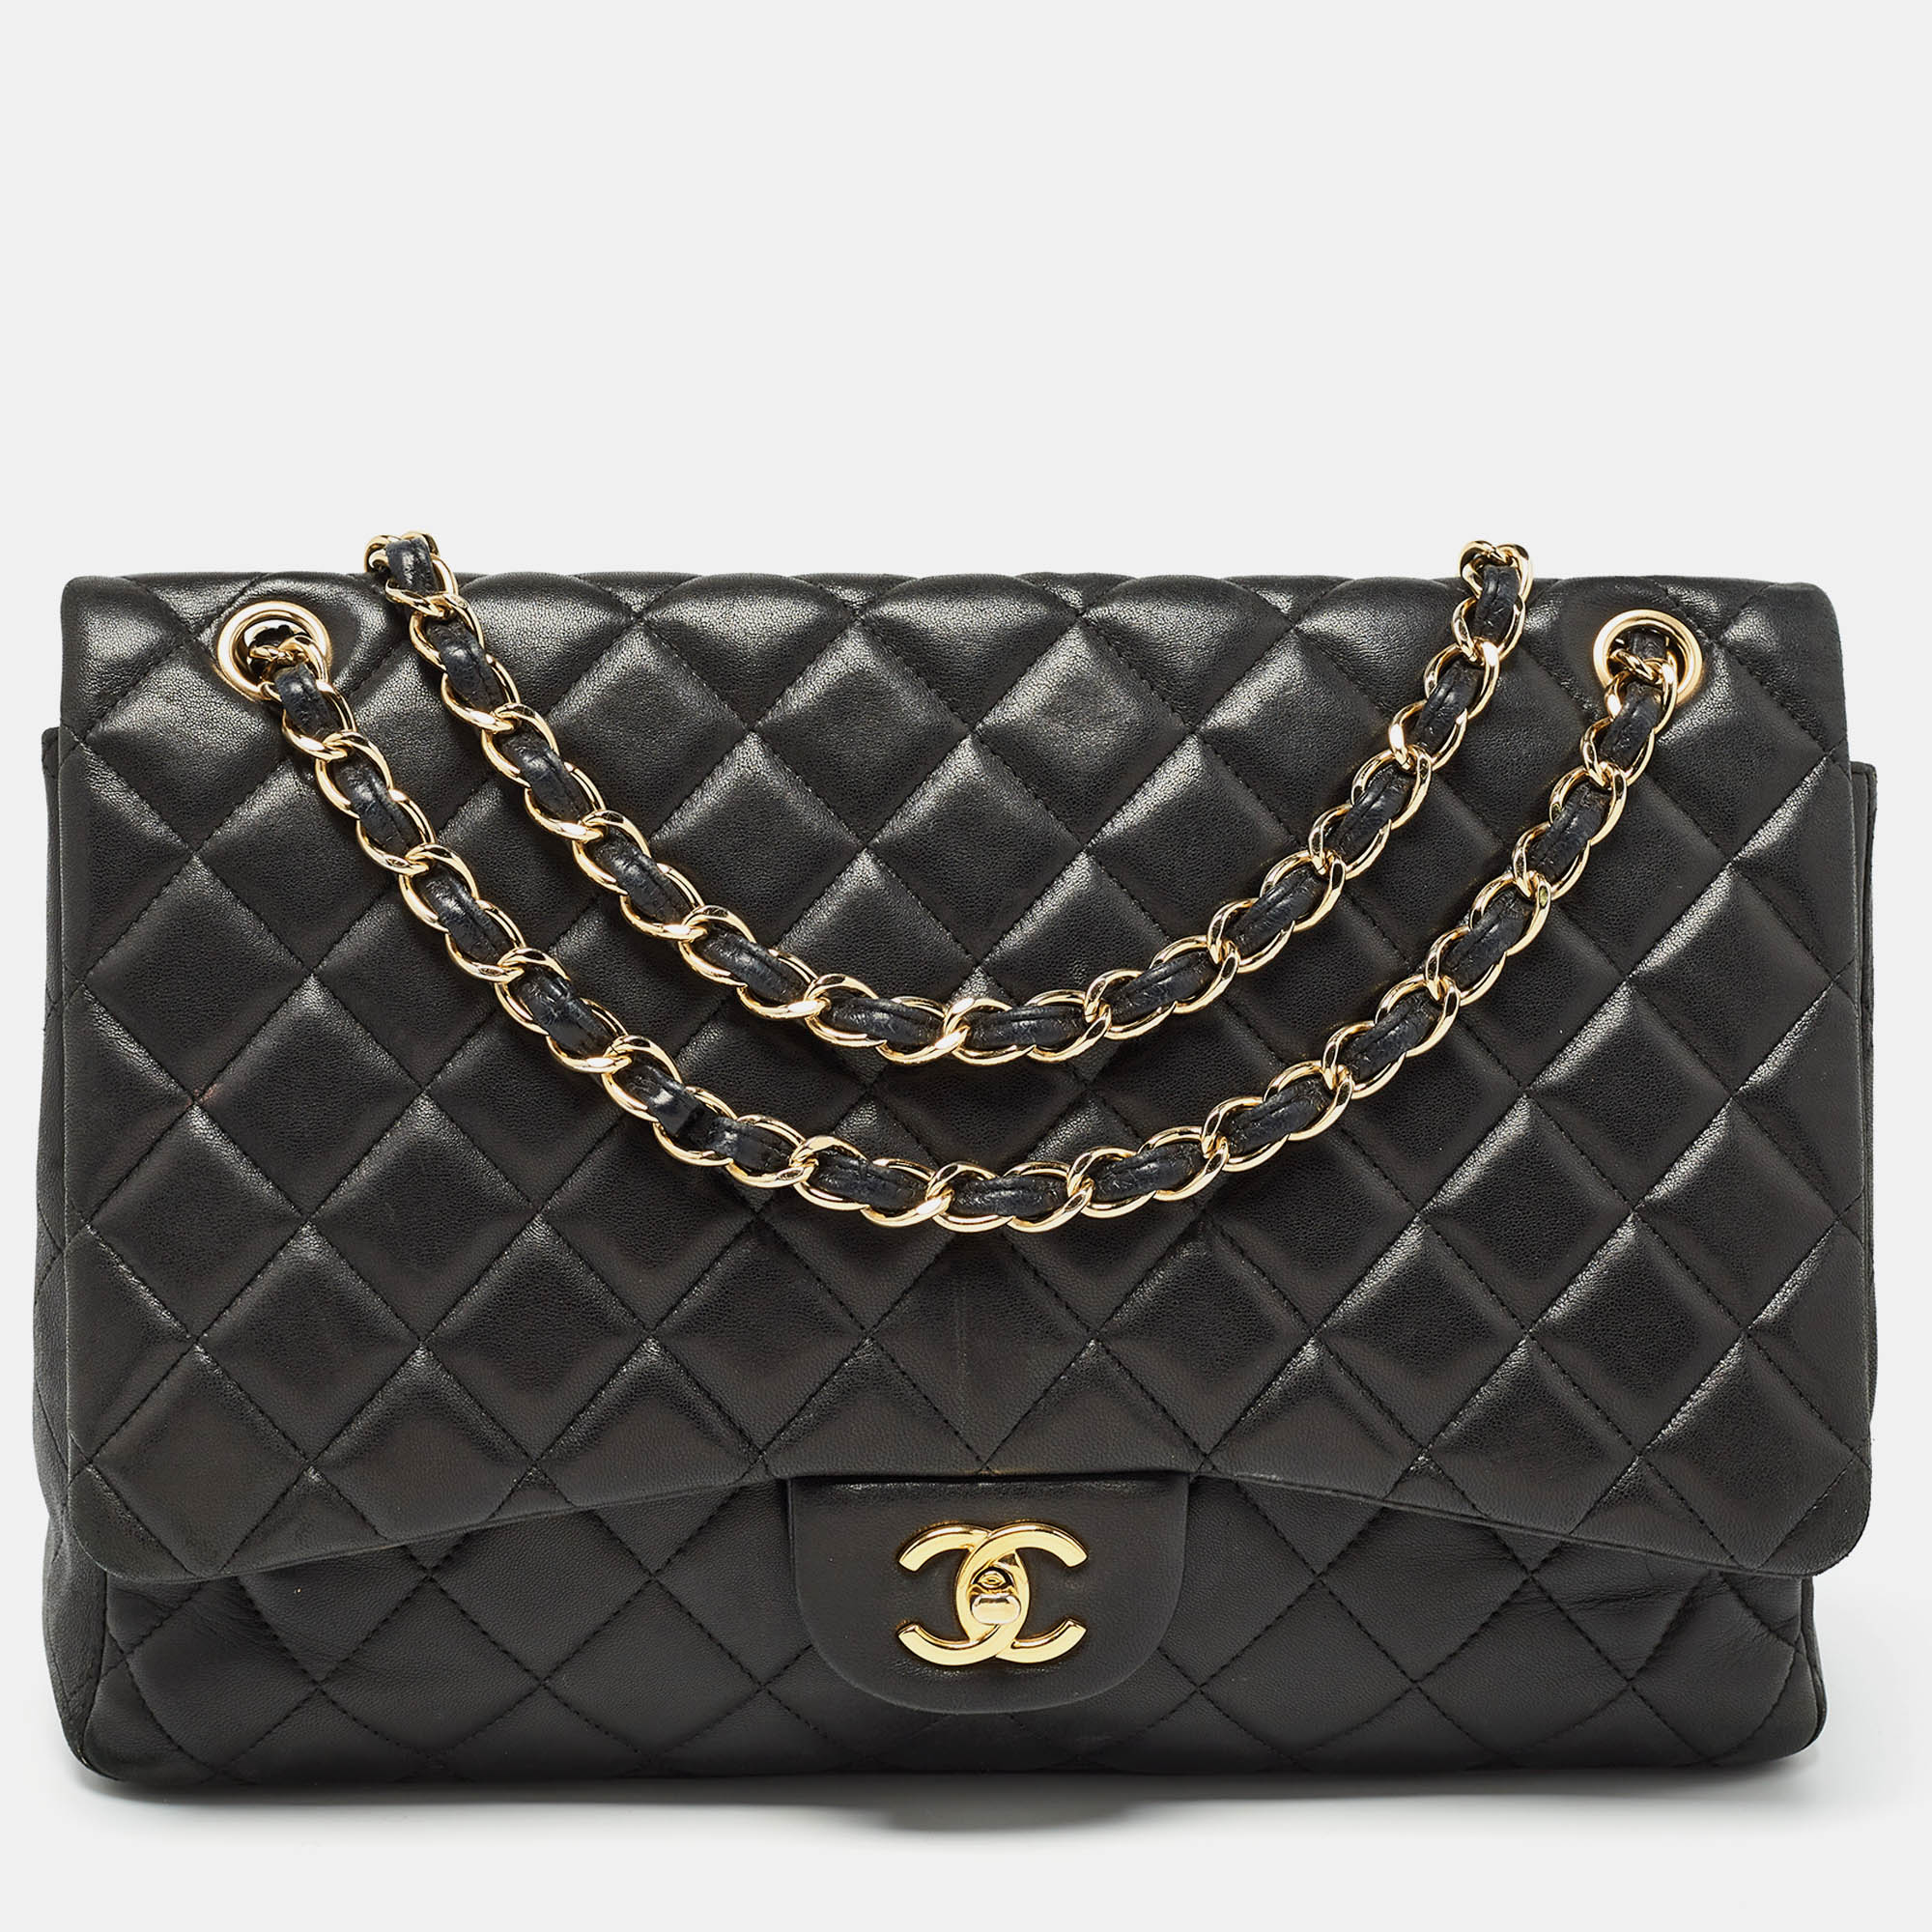 Chanel black quilted lambskin leather maxi classic single flap bag